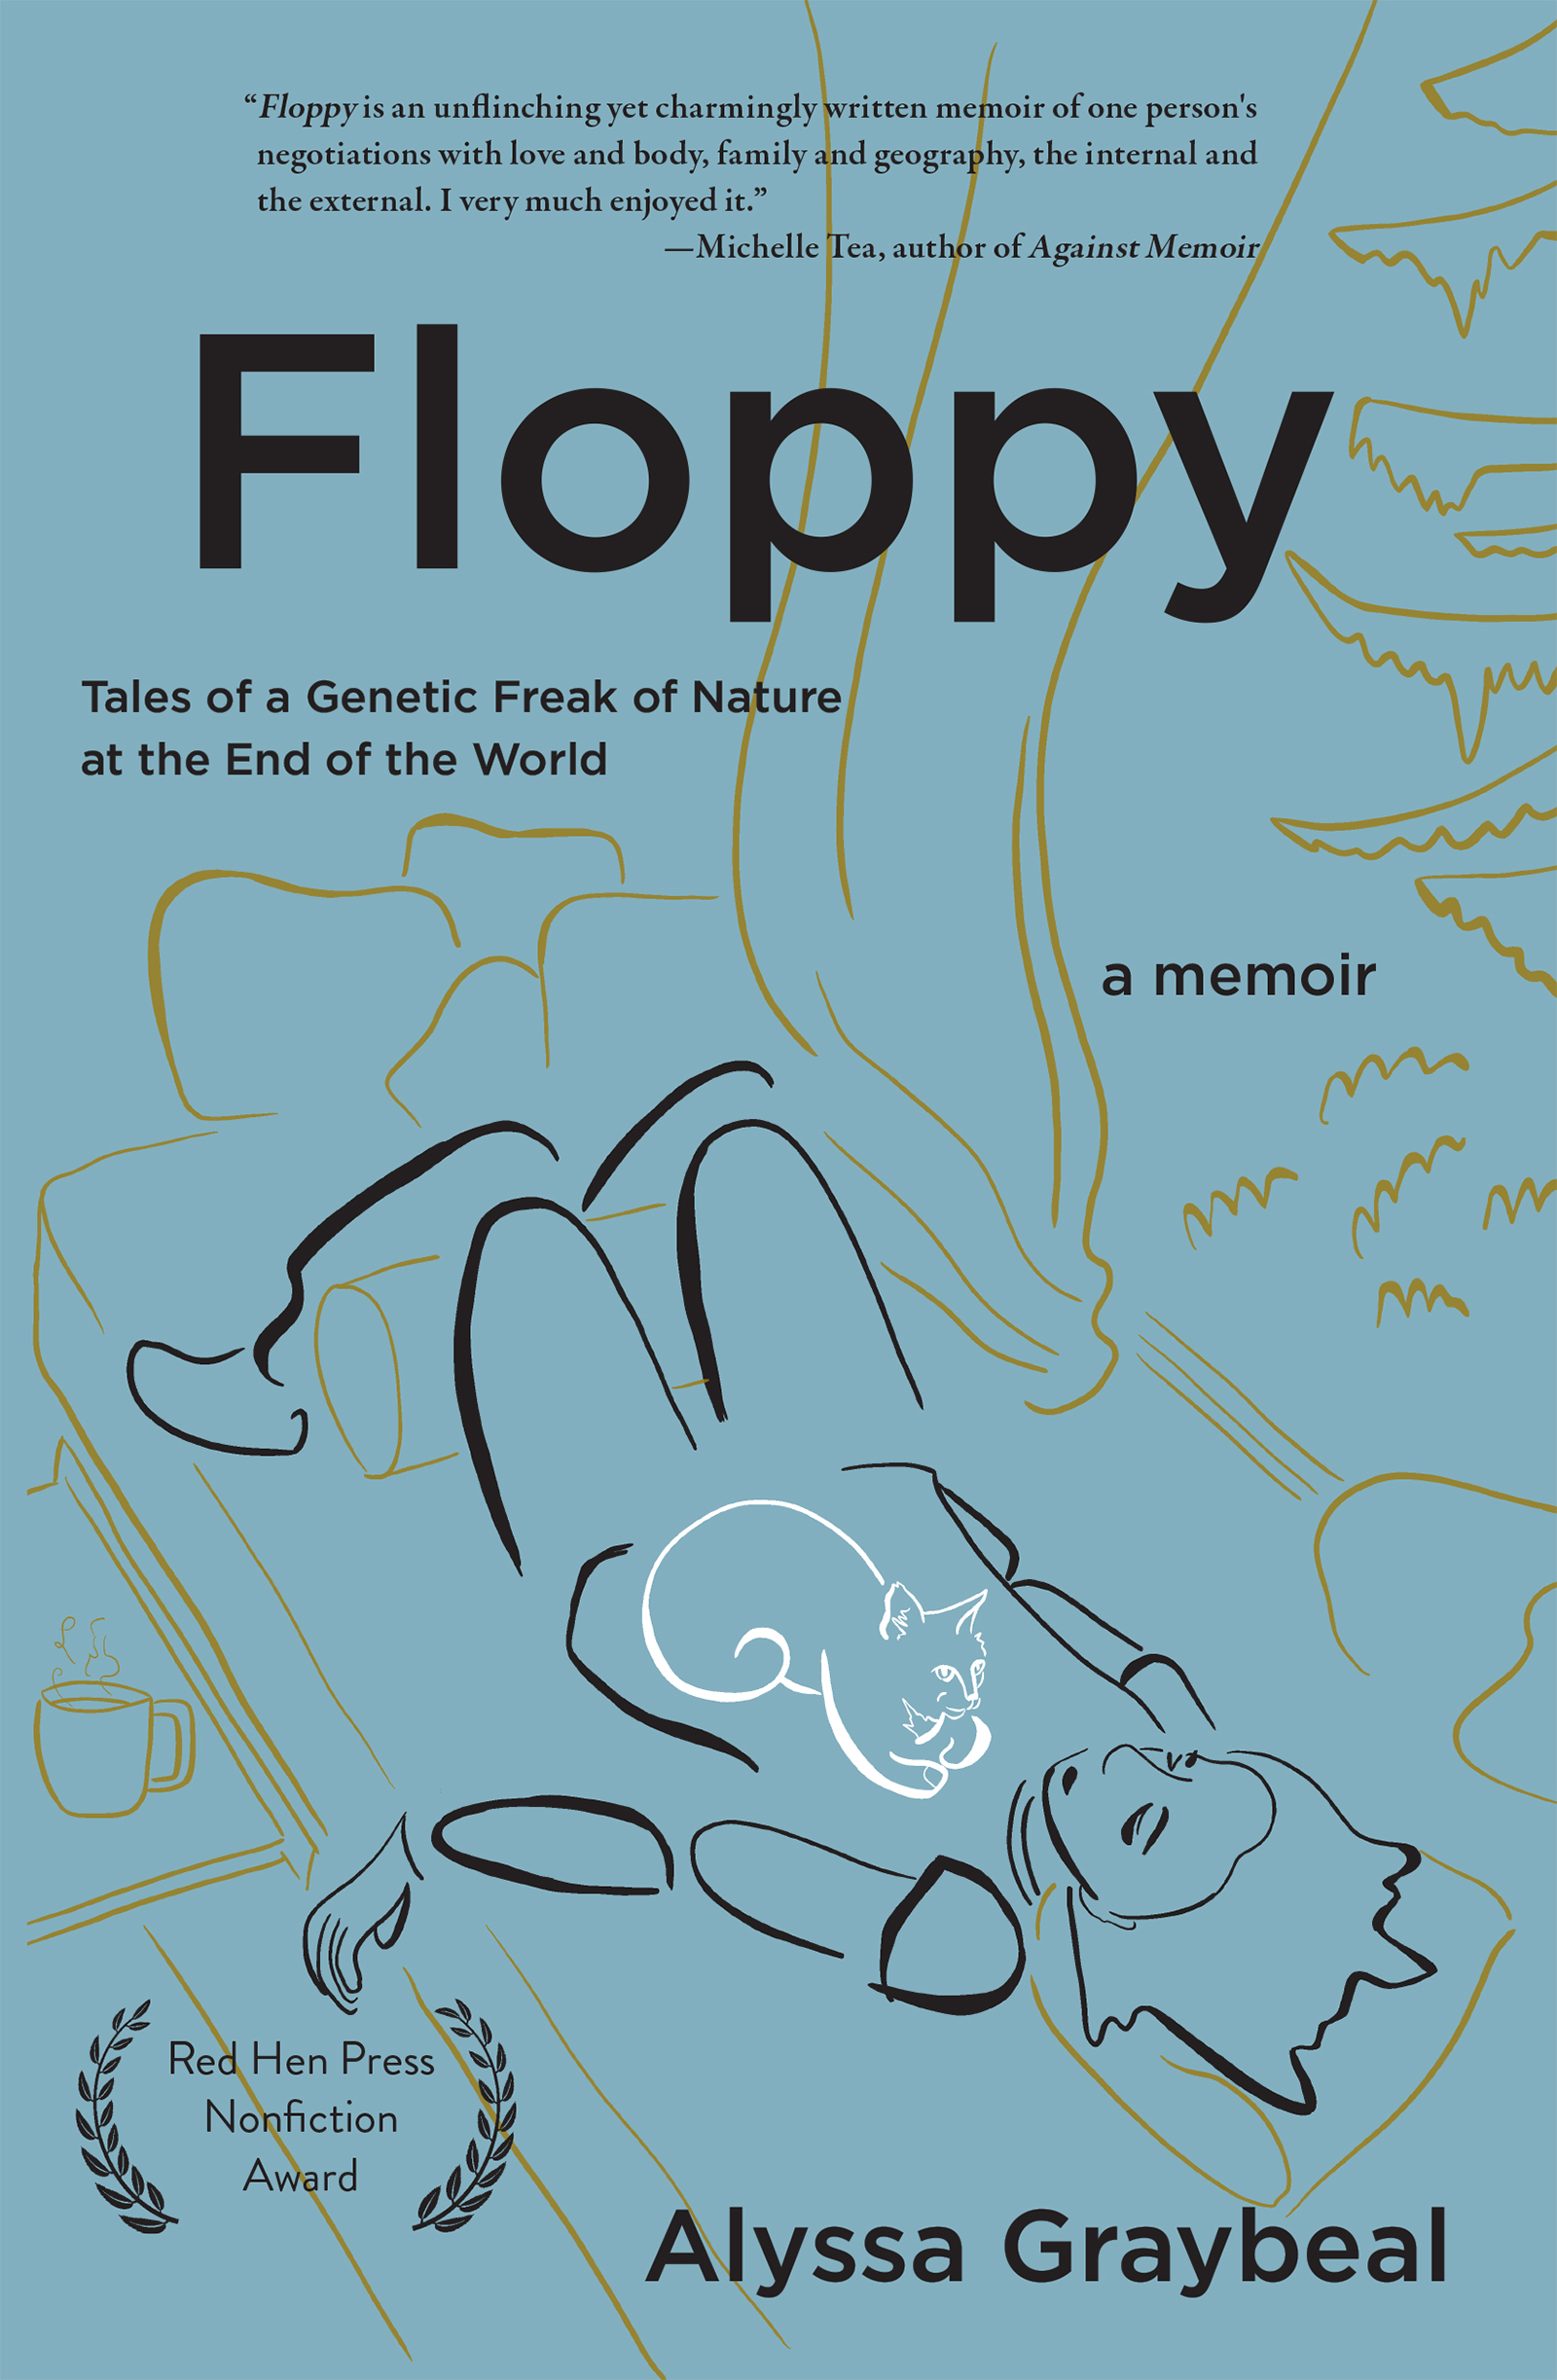 The cover art is by Alyssa Graybeal. The cover art portrays an individual laying down in their bed. A cat sits on the individual's chest. Superimposed over the art is black text that reads "Floppy."